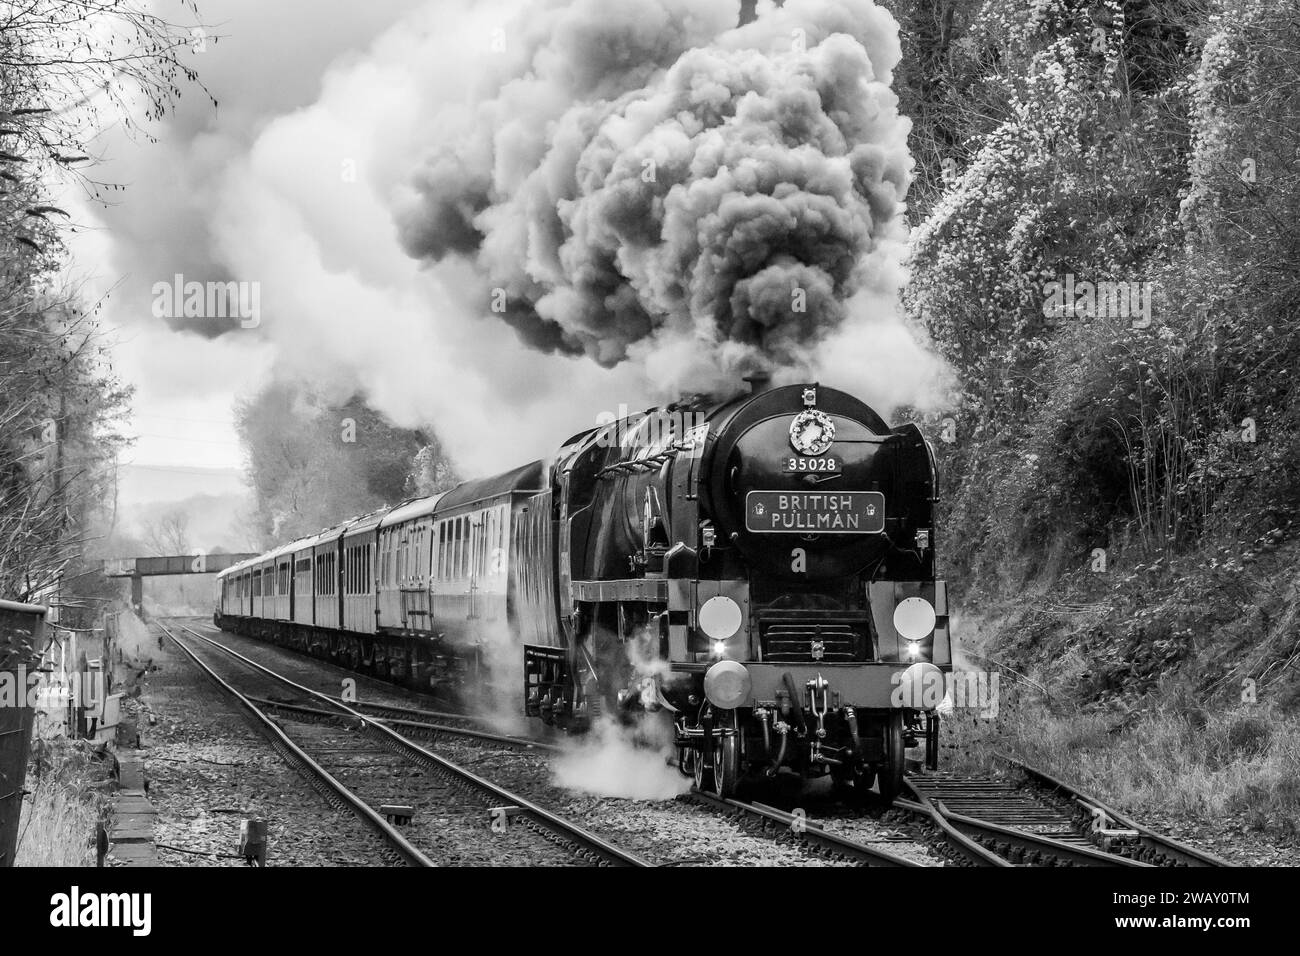 BR 'MN' 4-6-2 No. 35028 'Clan Line' approaches Betchworth station with a British Pullmans to London Victoria Stock Photo